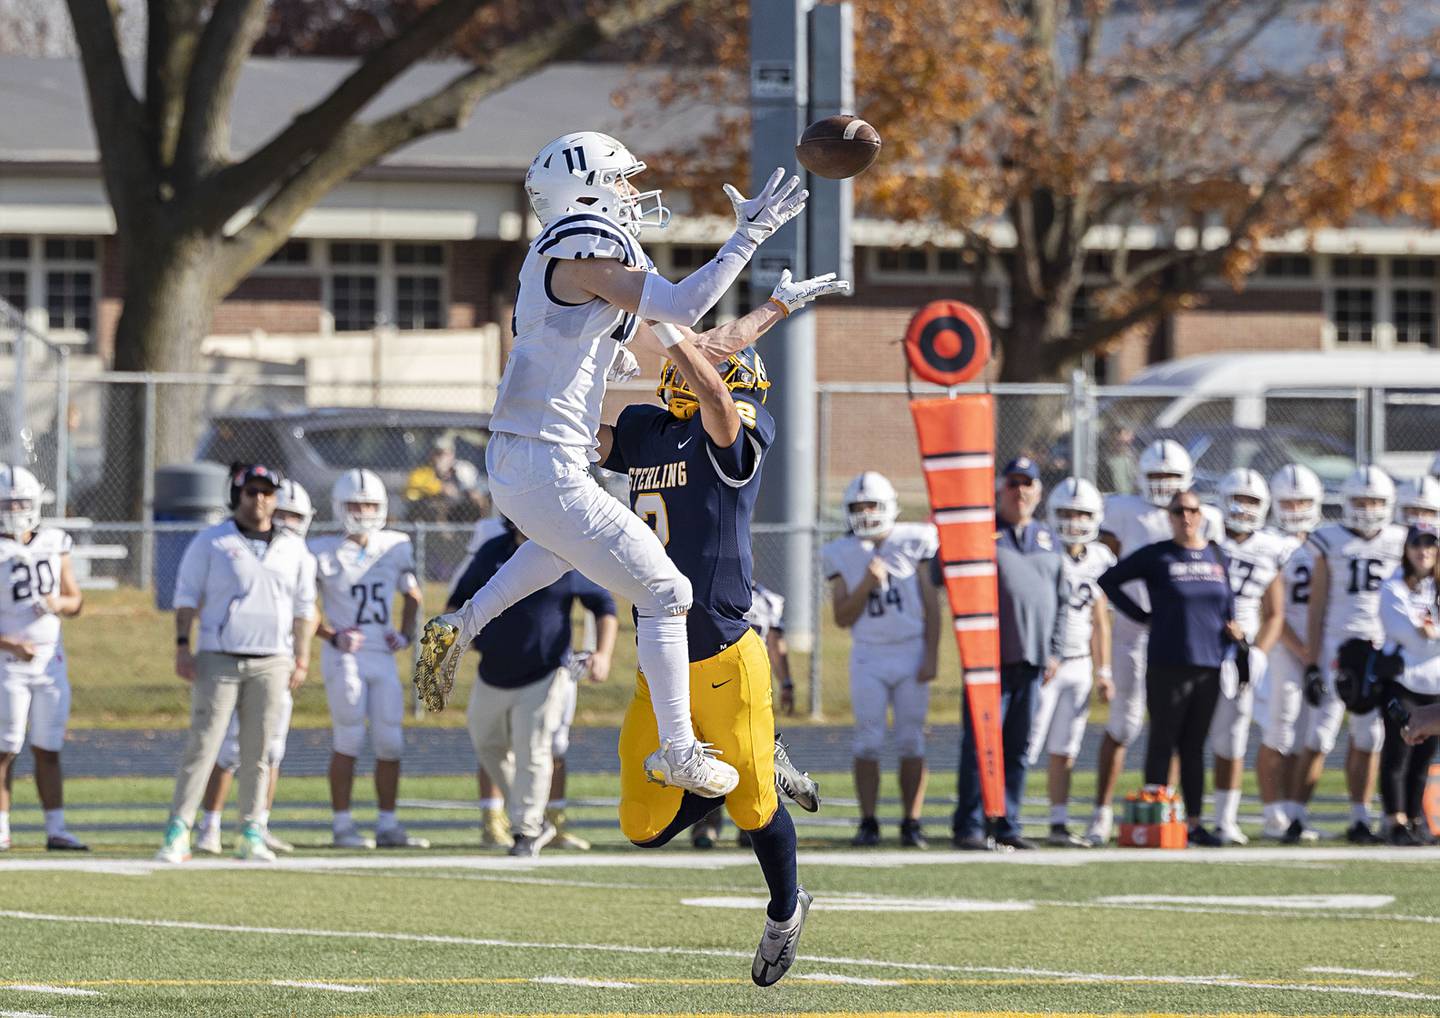 St. Viator’s Michael Nix hauls in a catch over Sterling’s JP Schilling in their first round playoff game Saturday, Oct. 29, 2022 against. The big gain was called back because of a penalty. Both teams lost several large gains due to yellow flags.